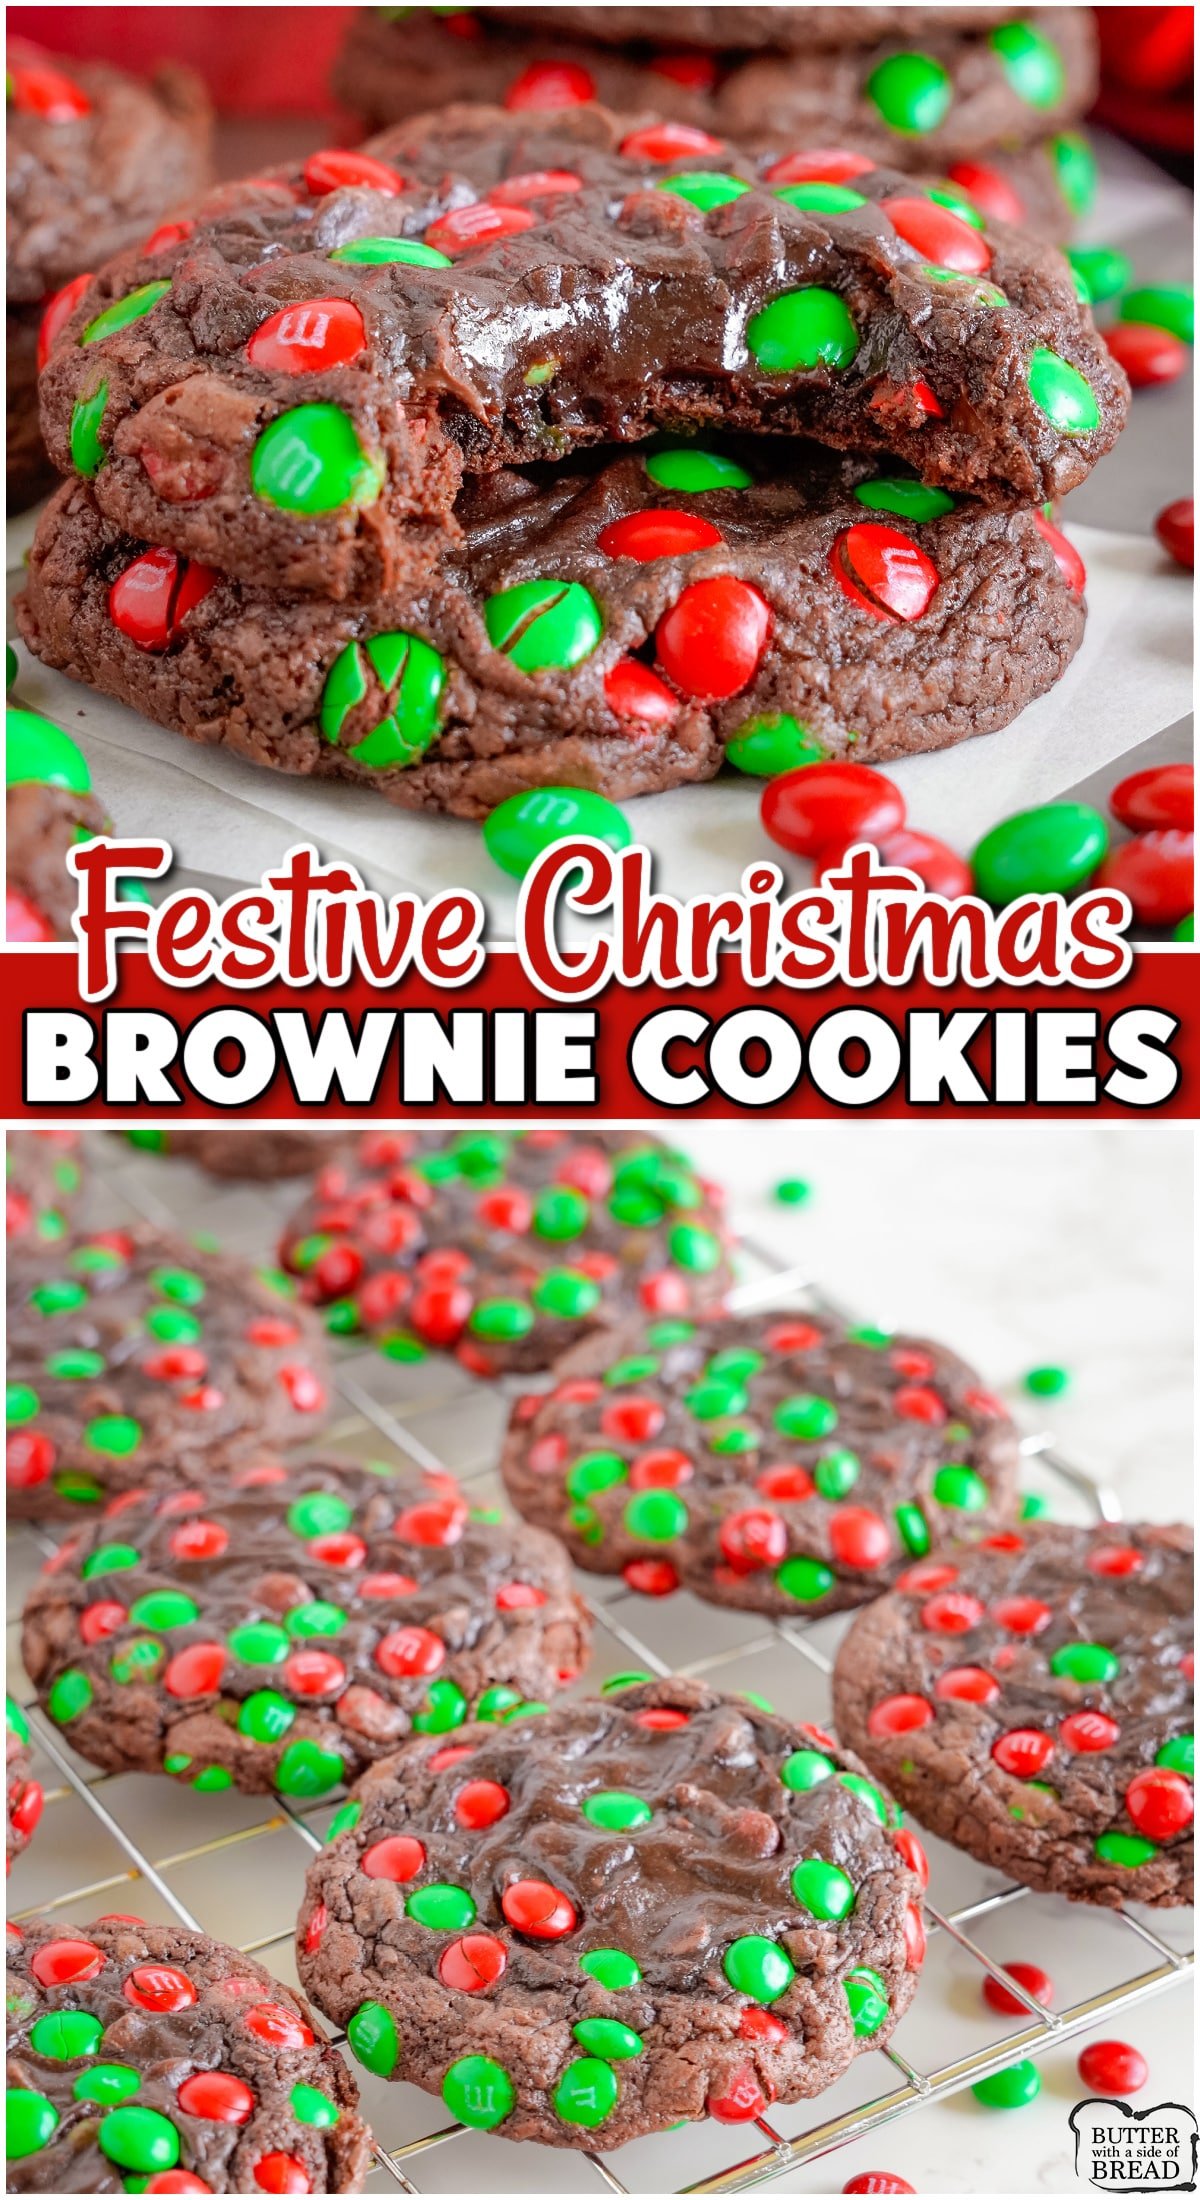 Christmas Brownie Cookies are fudgy, chocolate treats made easily with a brownie mix & M&M candies! Festive colors and lovely flavor adorn these simple brownie mix cookies!